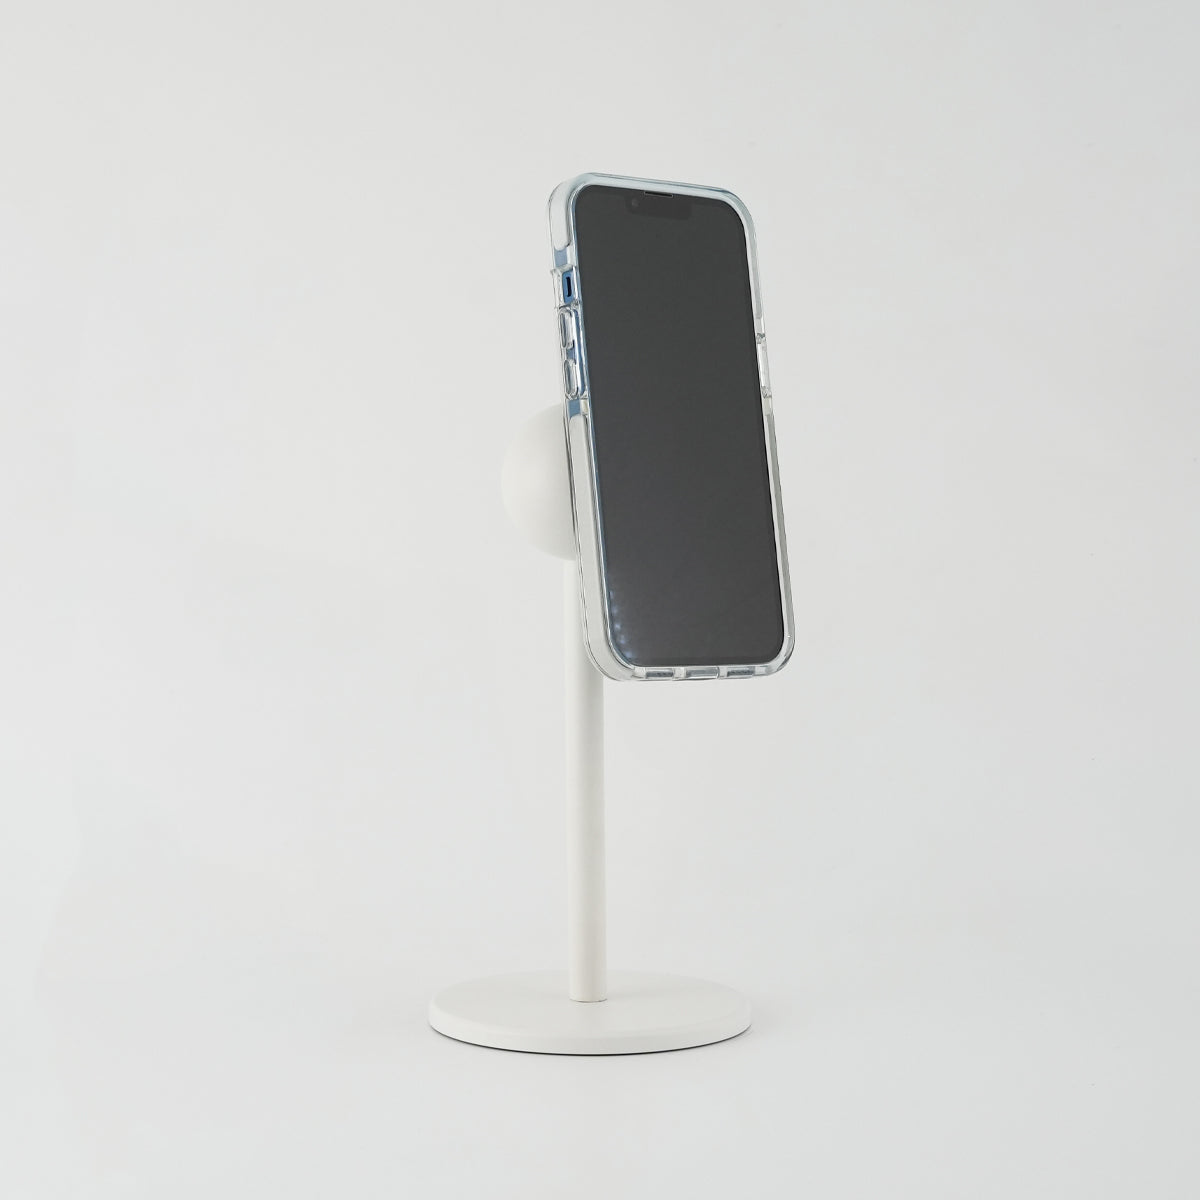 iOstand® and iOmini™ Device Stand